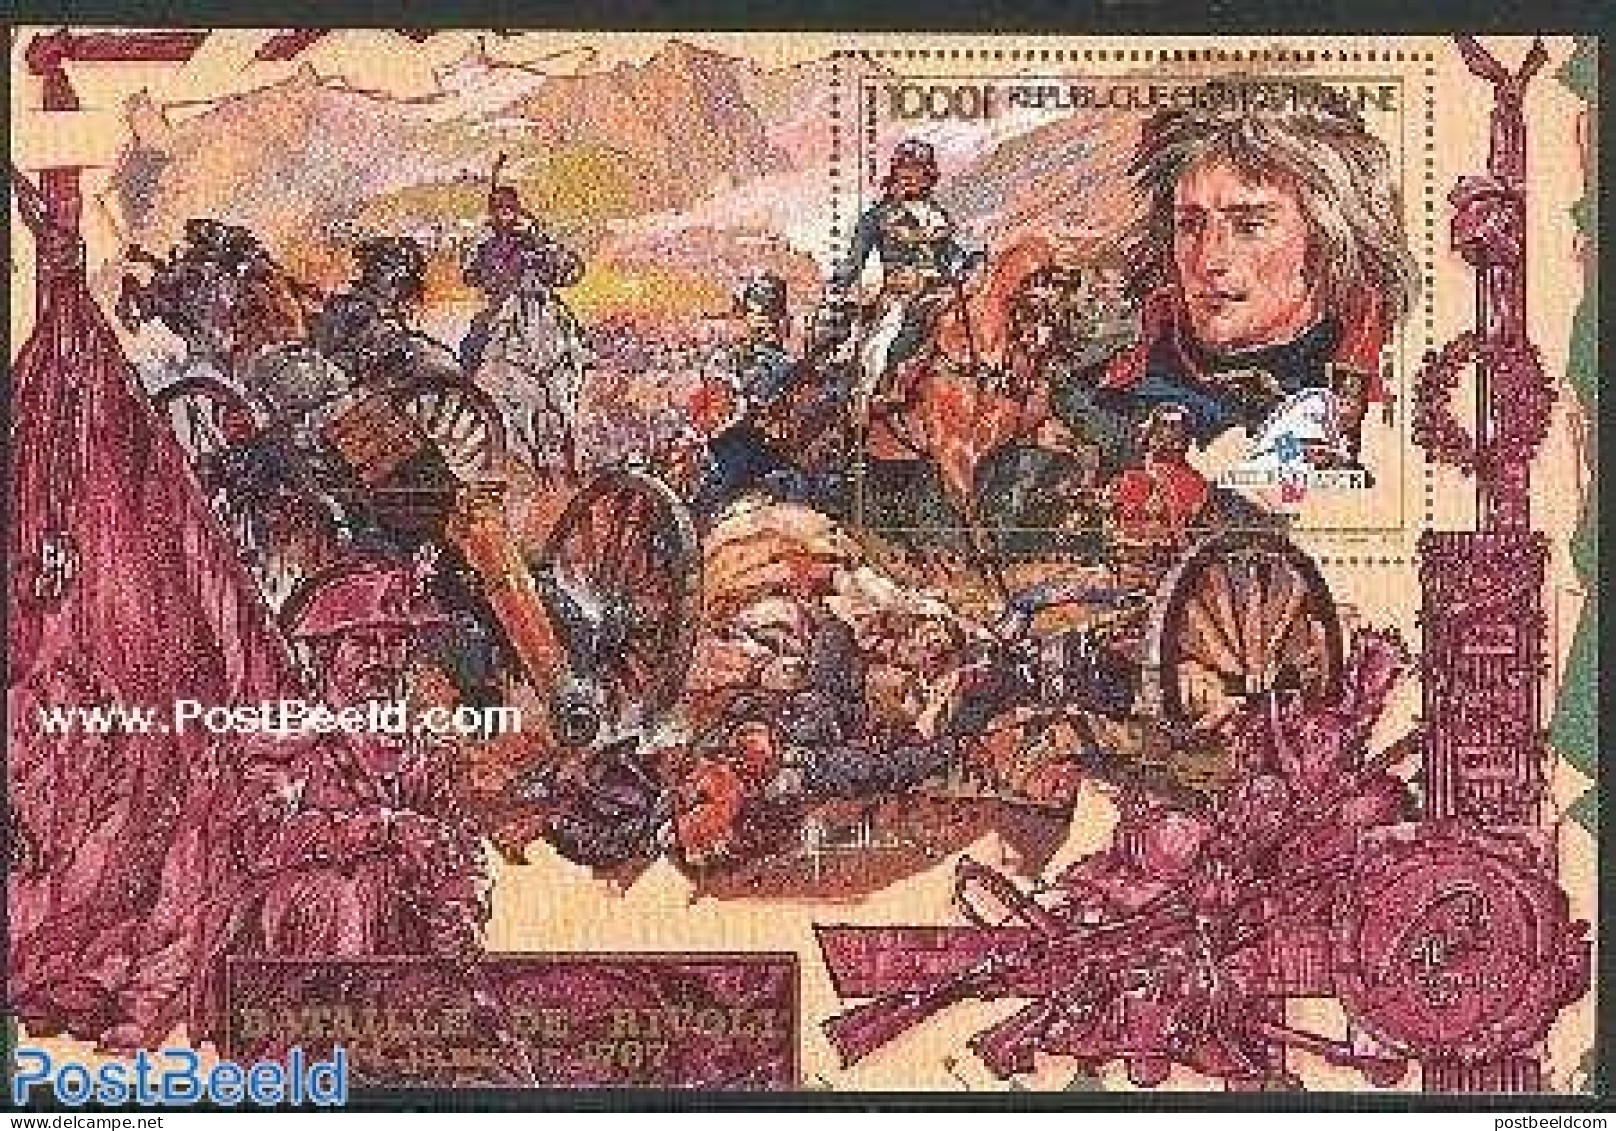 Central Africa 1989 French Revolution S/s, Mint NH, History - Nature - History - Horses - Centrafricaine (République)